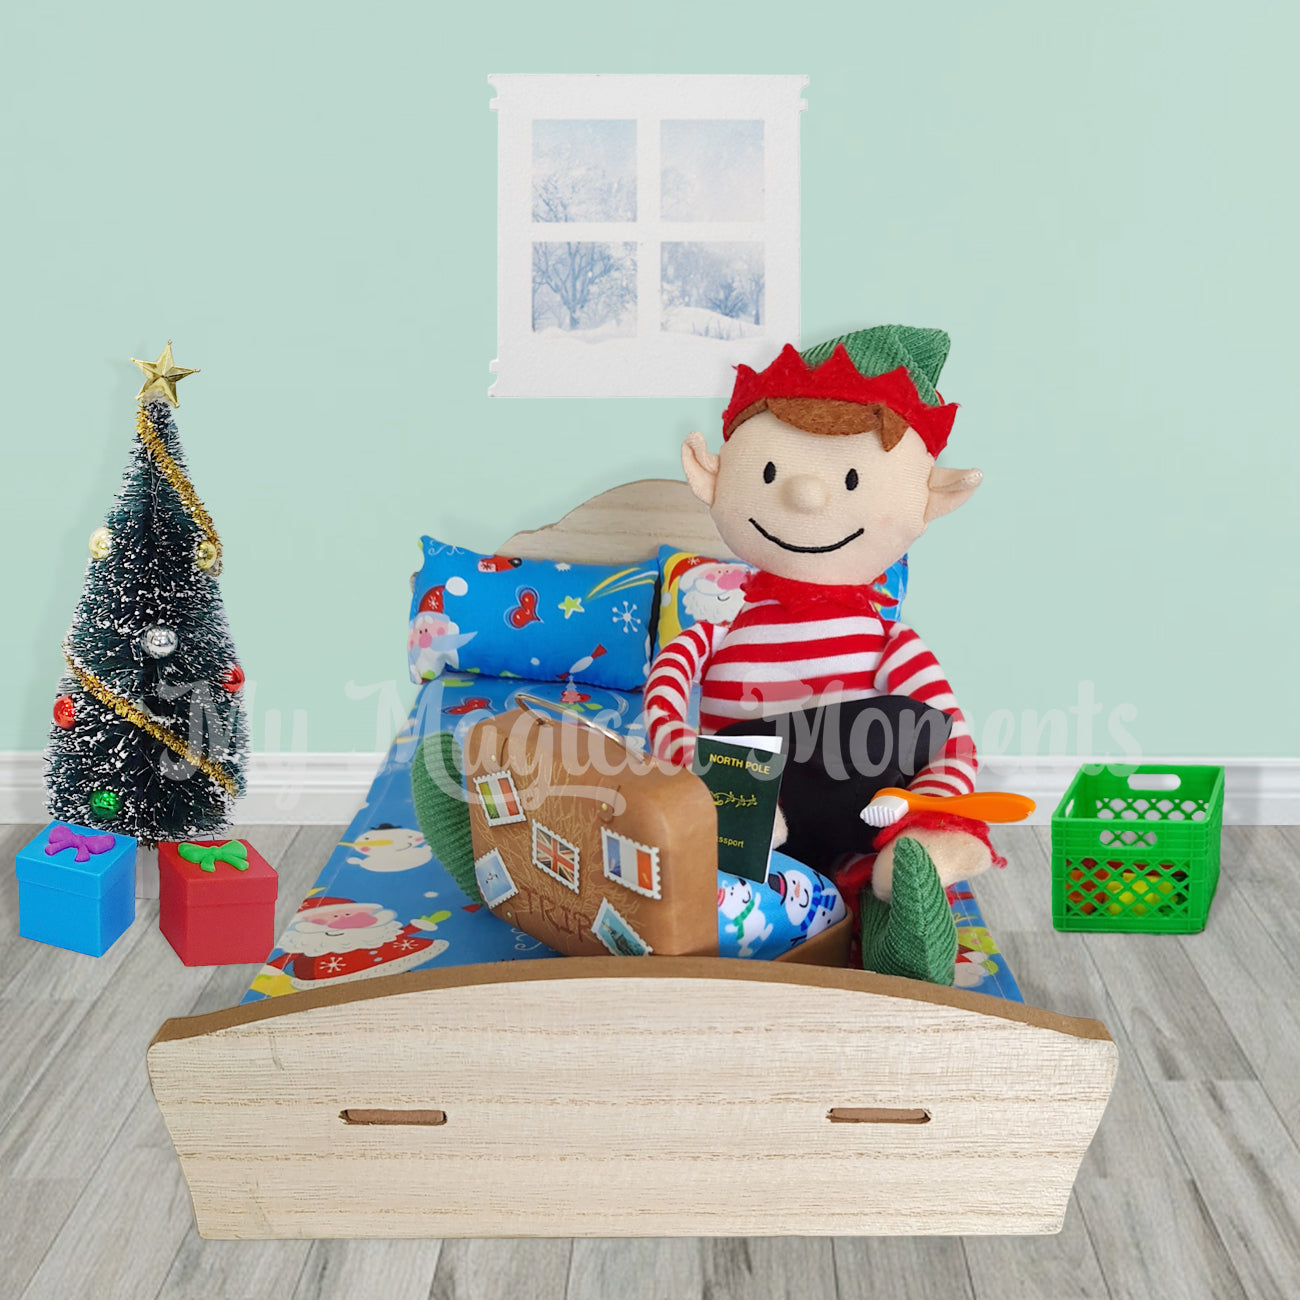 Elf for Christmas packing his suitcase in a bedroom with a Christmas tree and crate